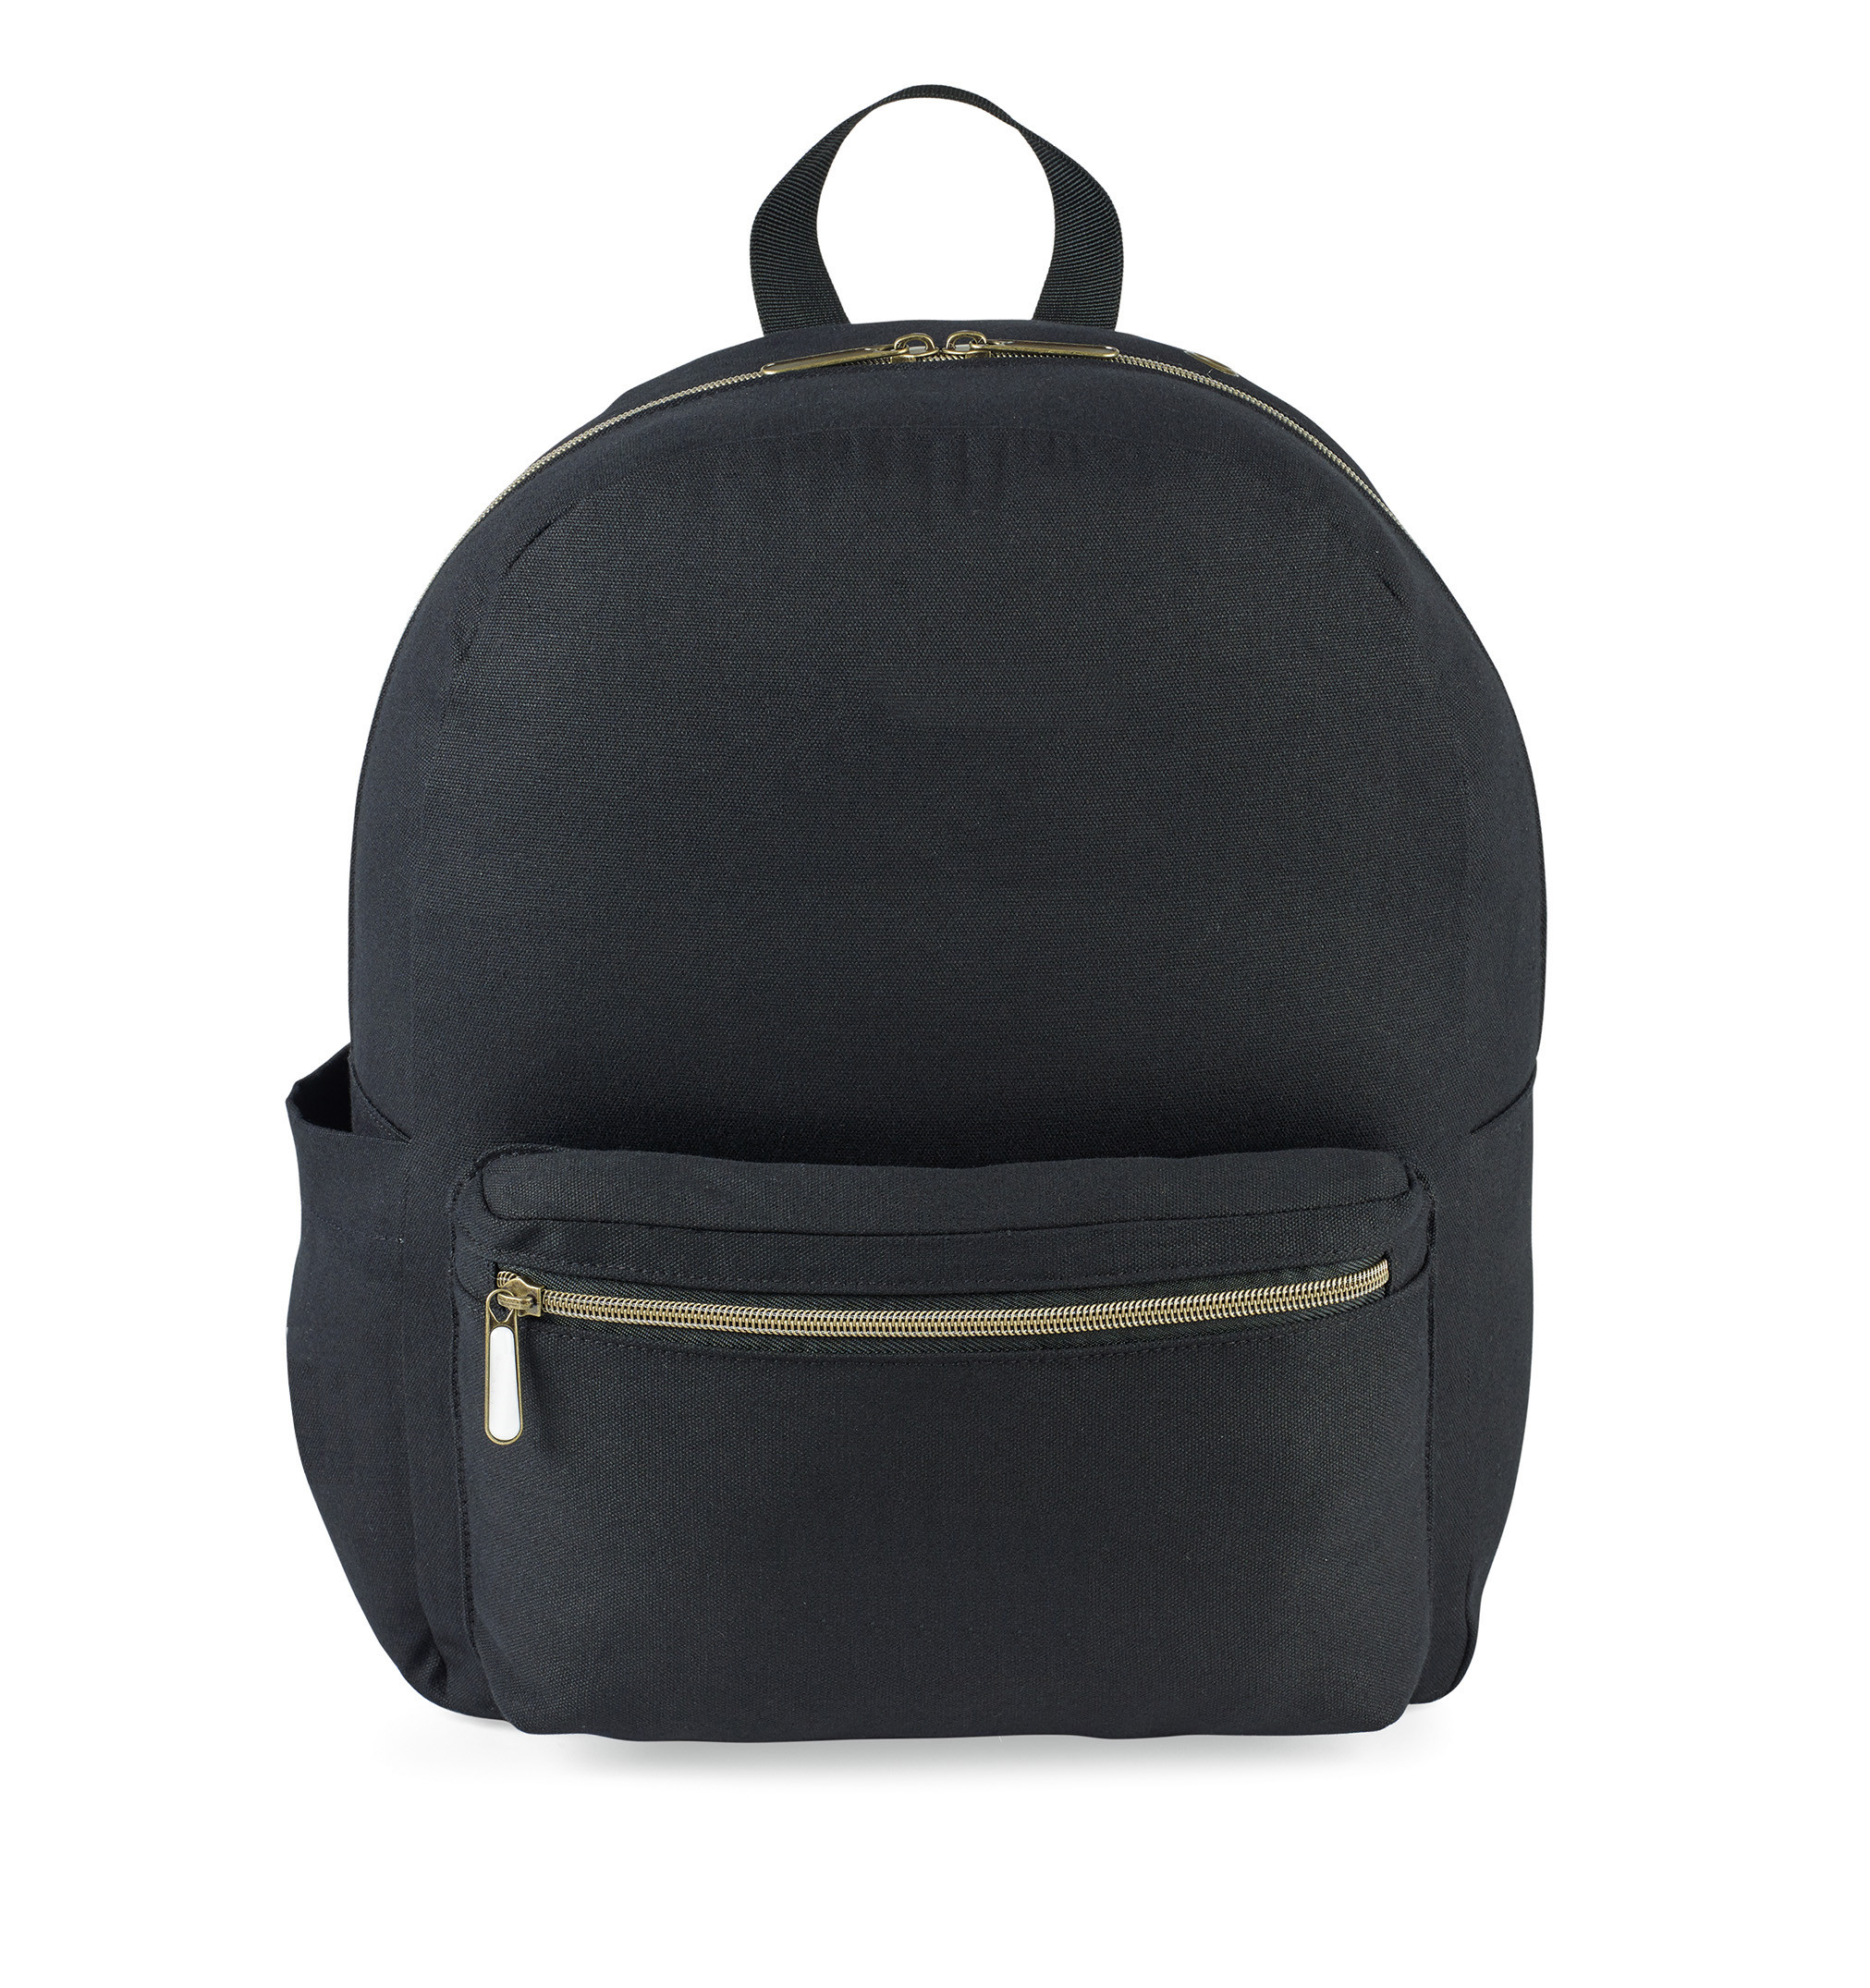 Gemline 5289 - Russell Cotton Backpack $19.50 - Bags